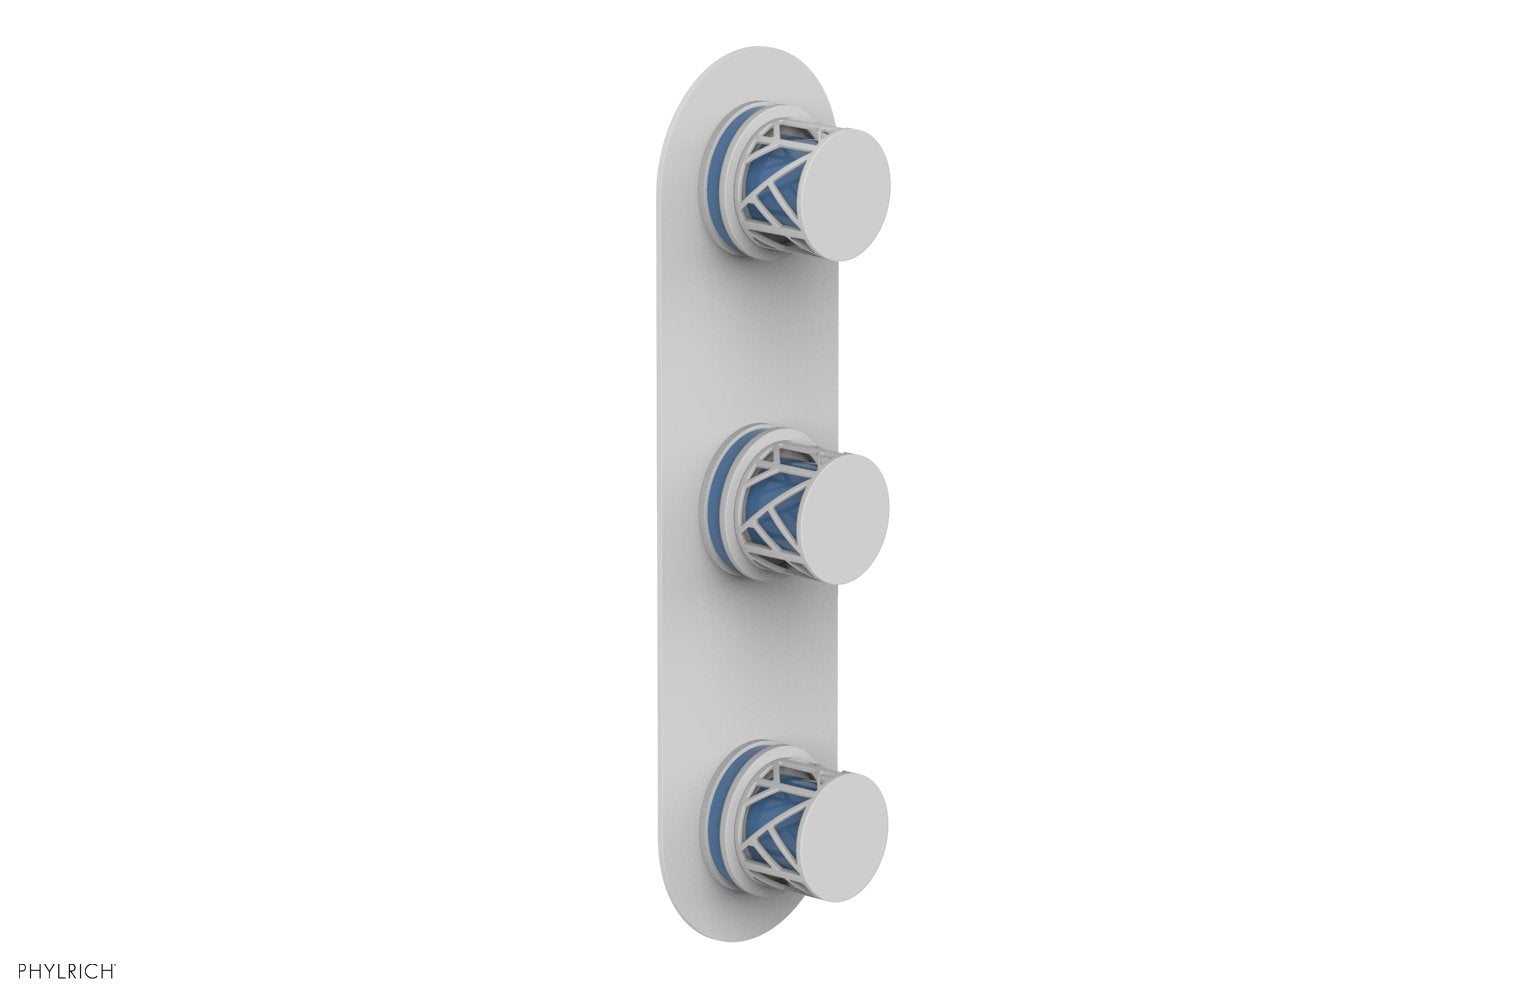 Phylrich JOLIE Thermostatic Valve with Two Volume Control with "Light Blue" Accents